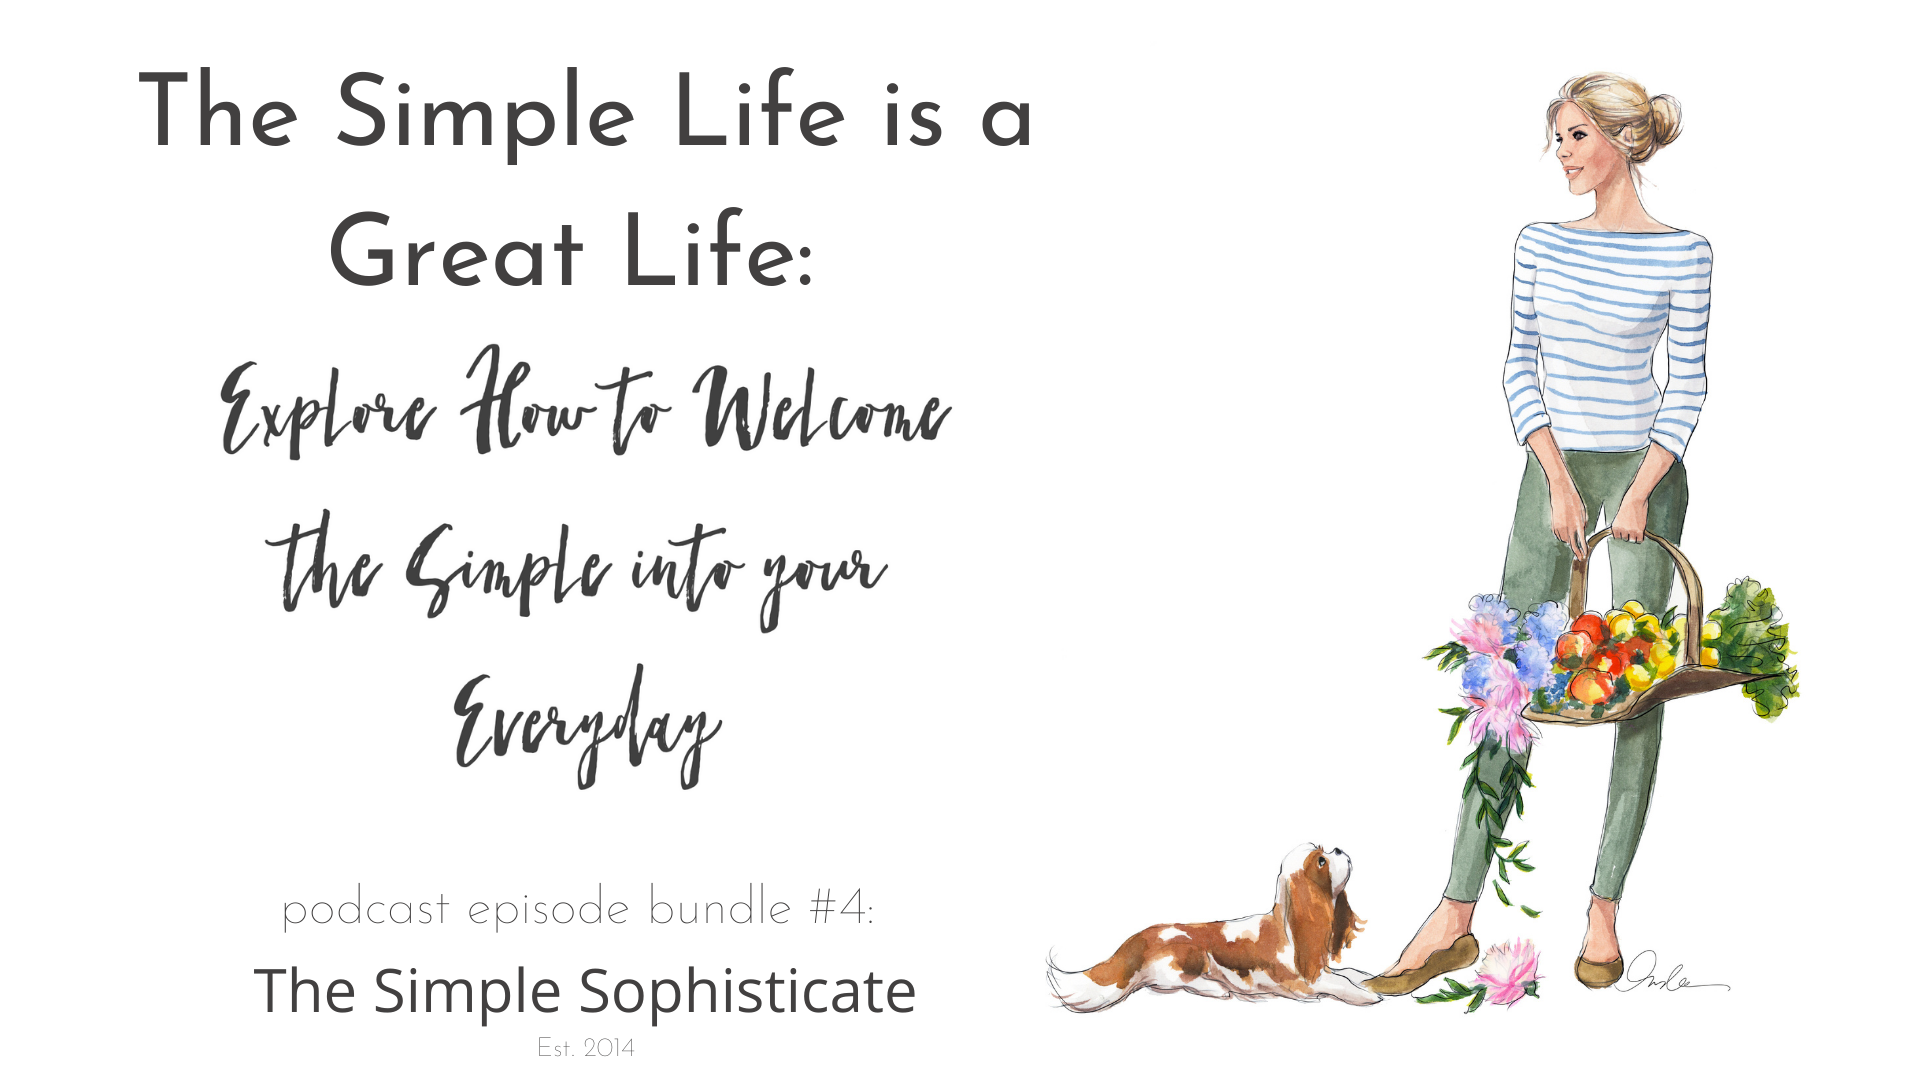 The Simple Life is a Great Life: Explore How in Podcast Bundle #4